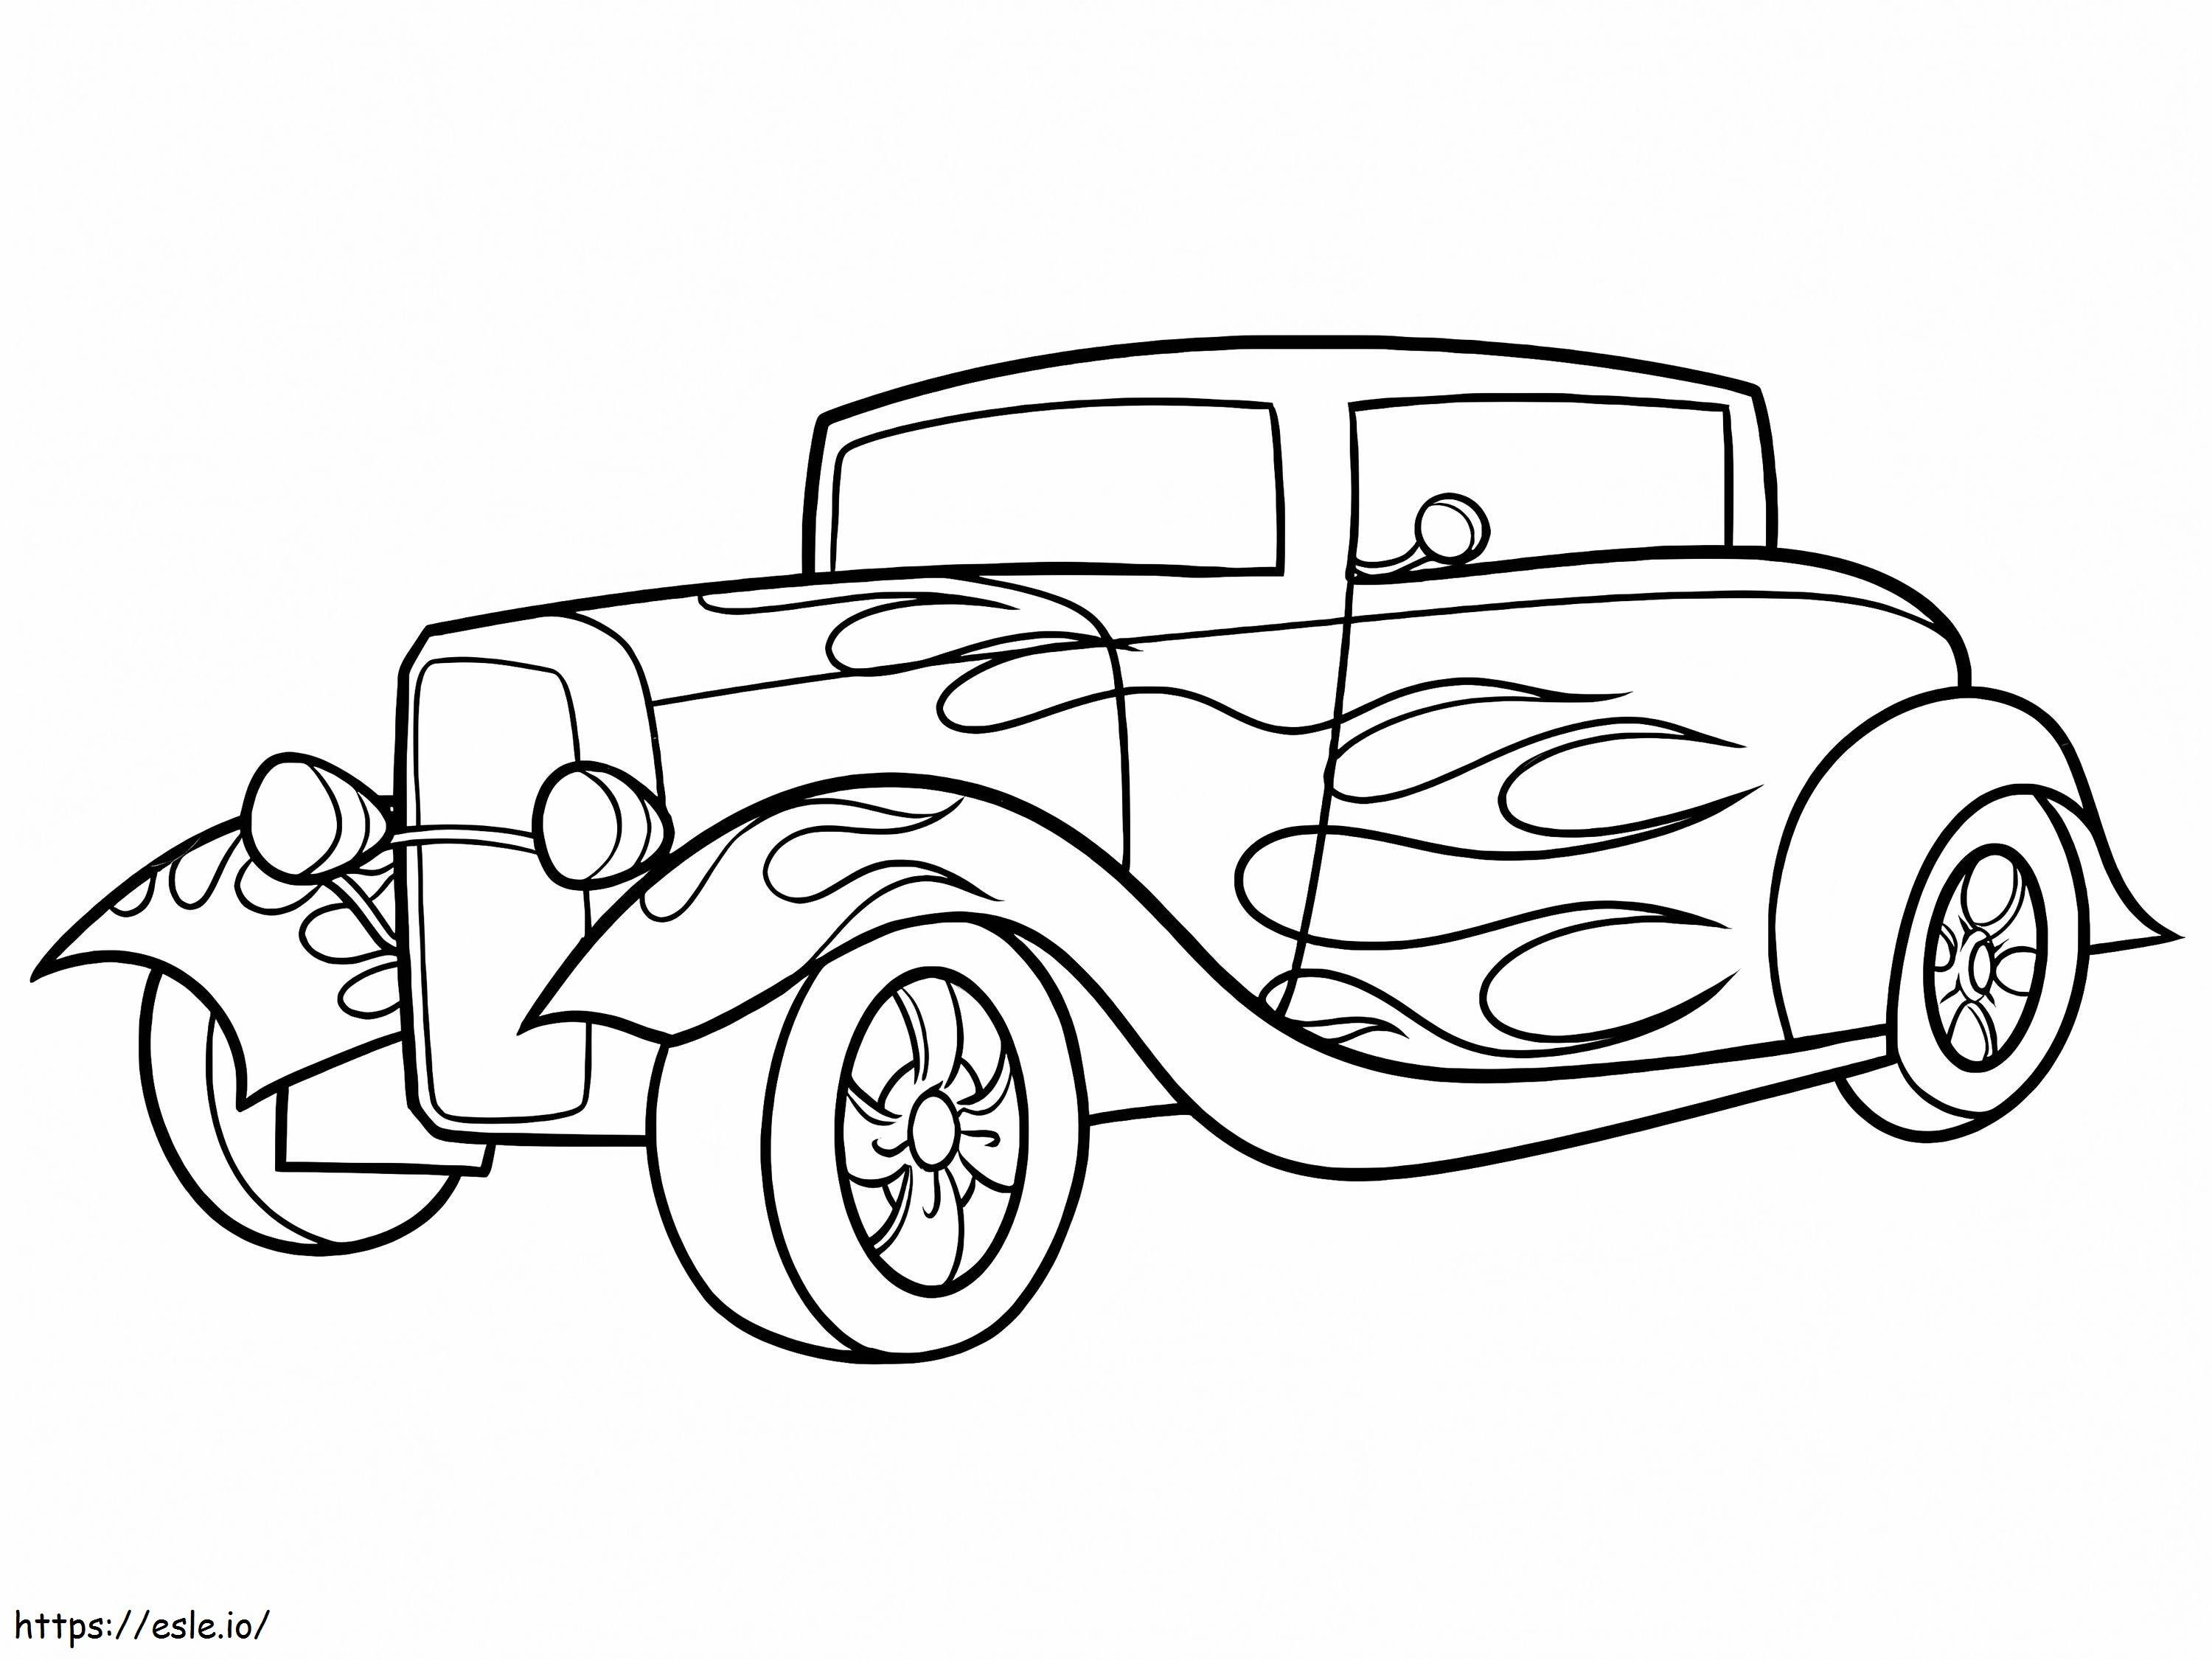 Hot Rod Printable coloring page